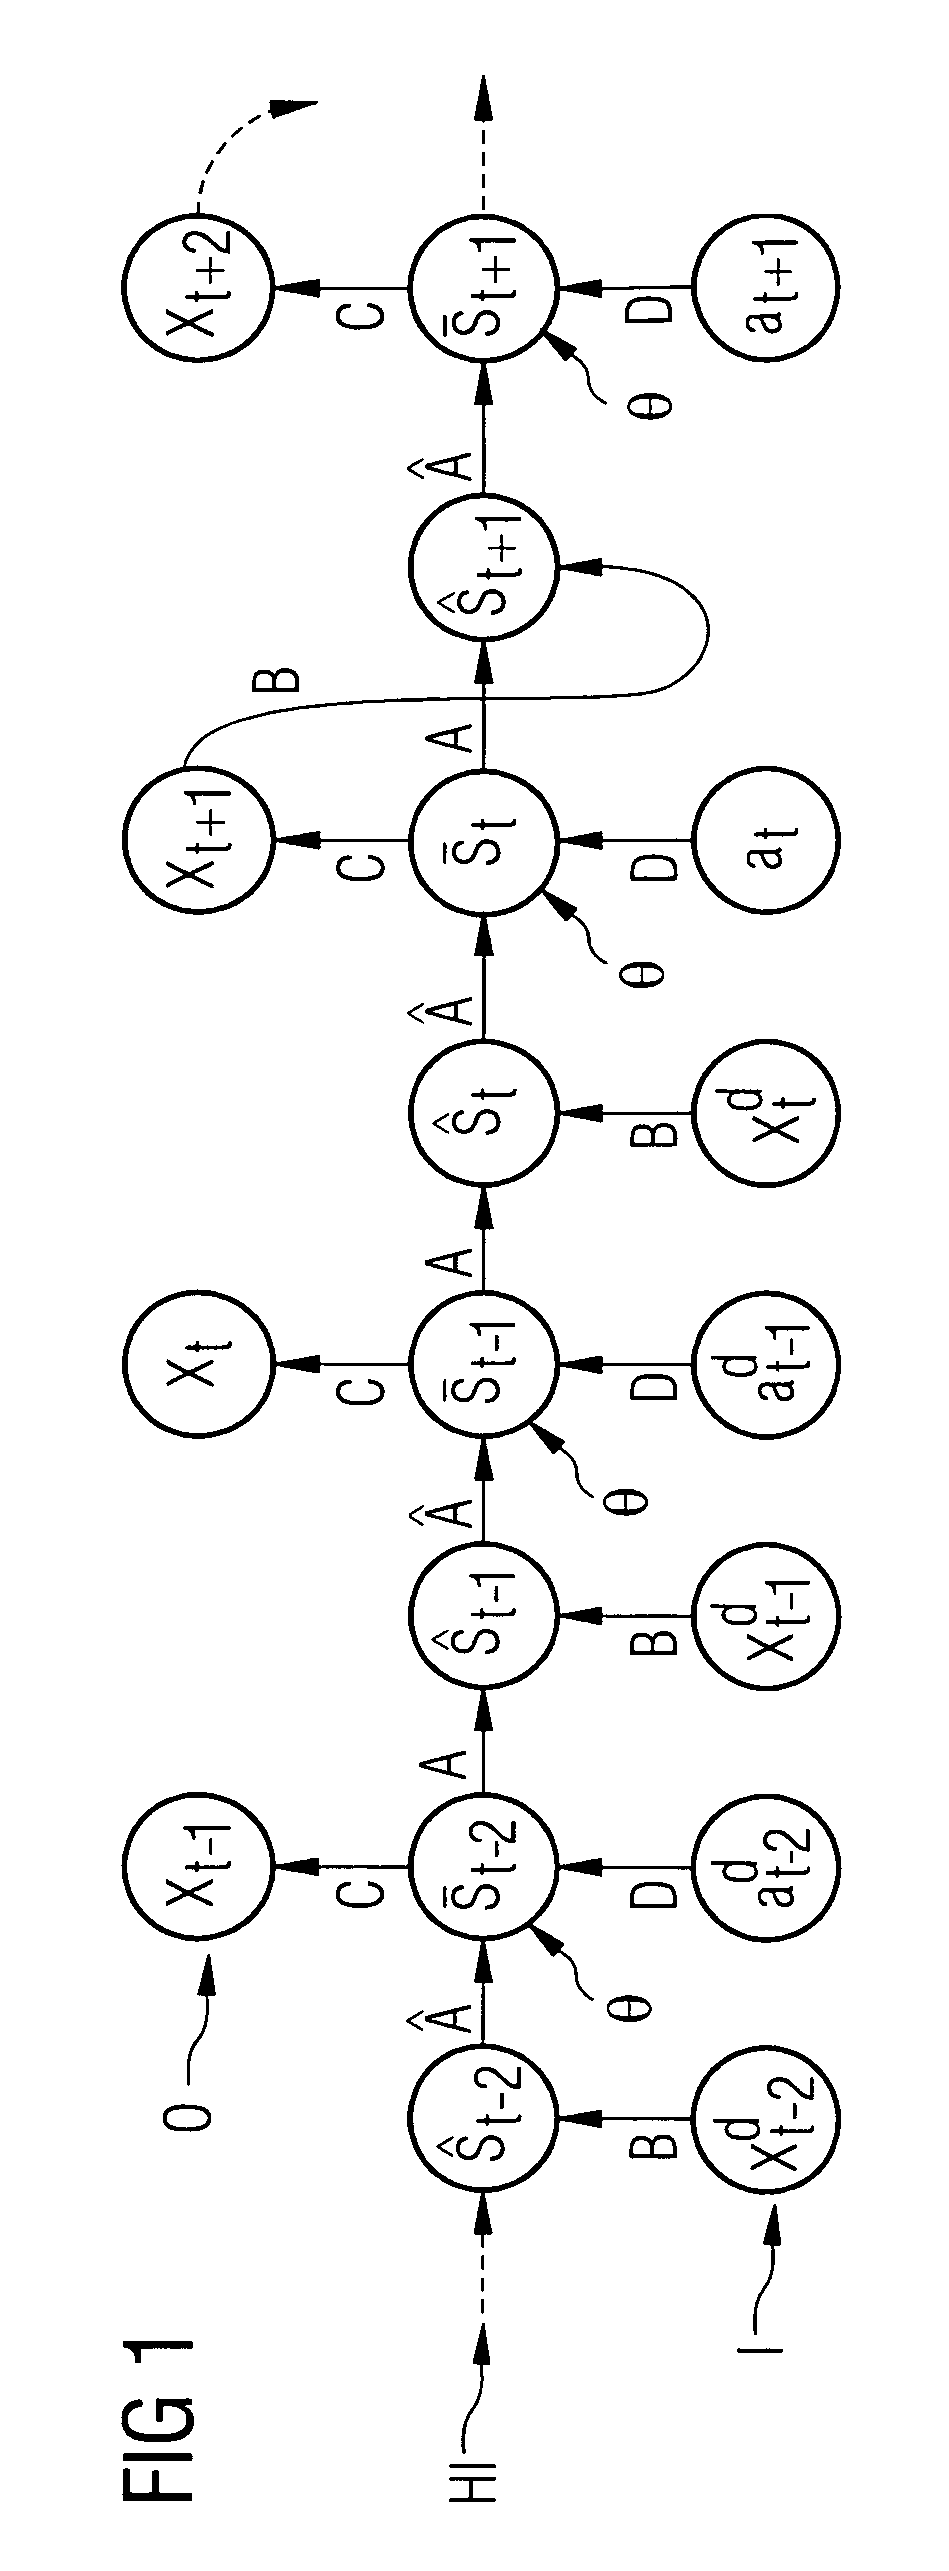 Method for computer-aided control or regulation of a technical system